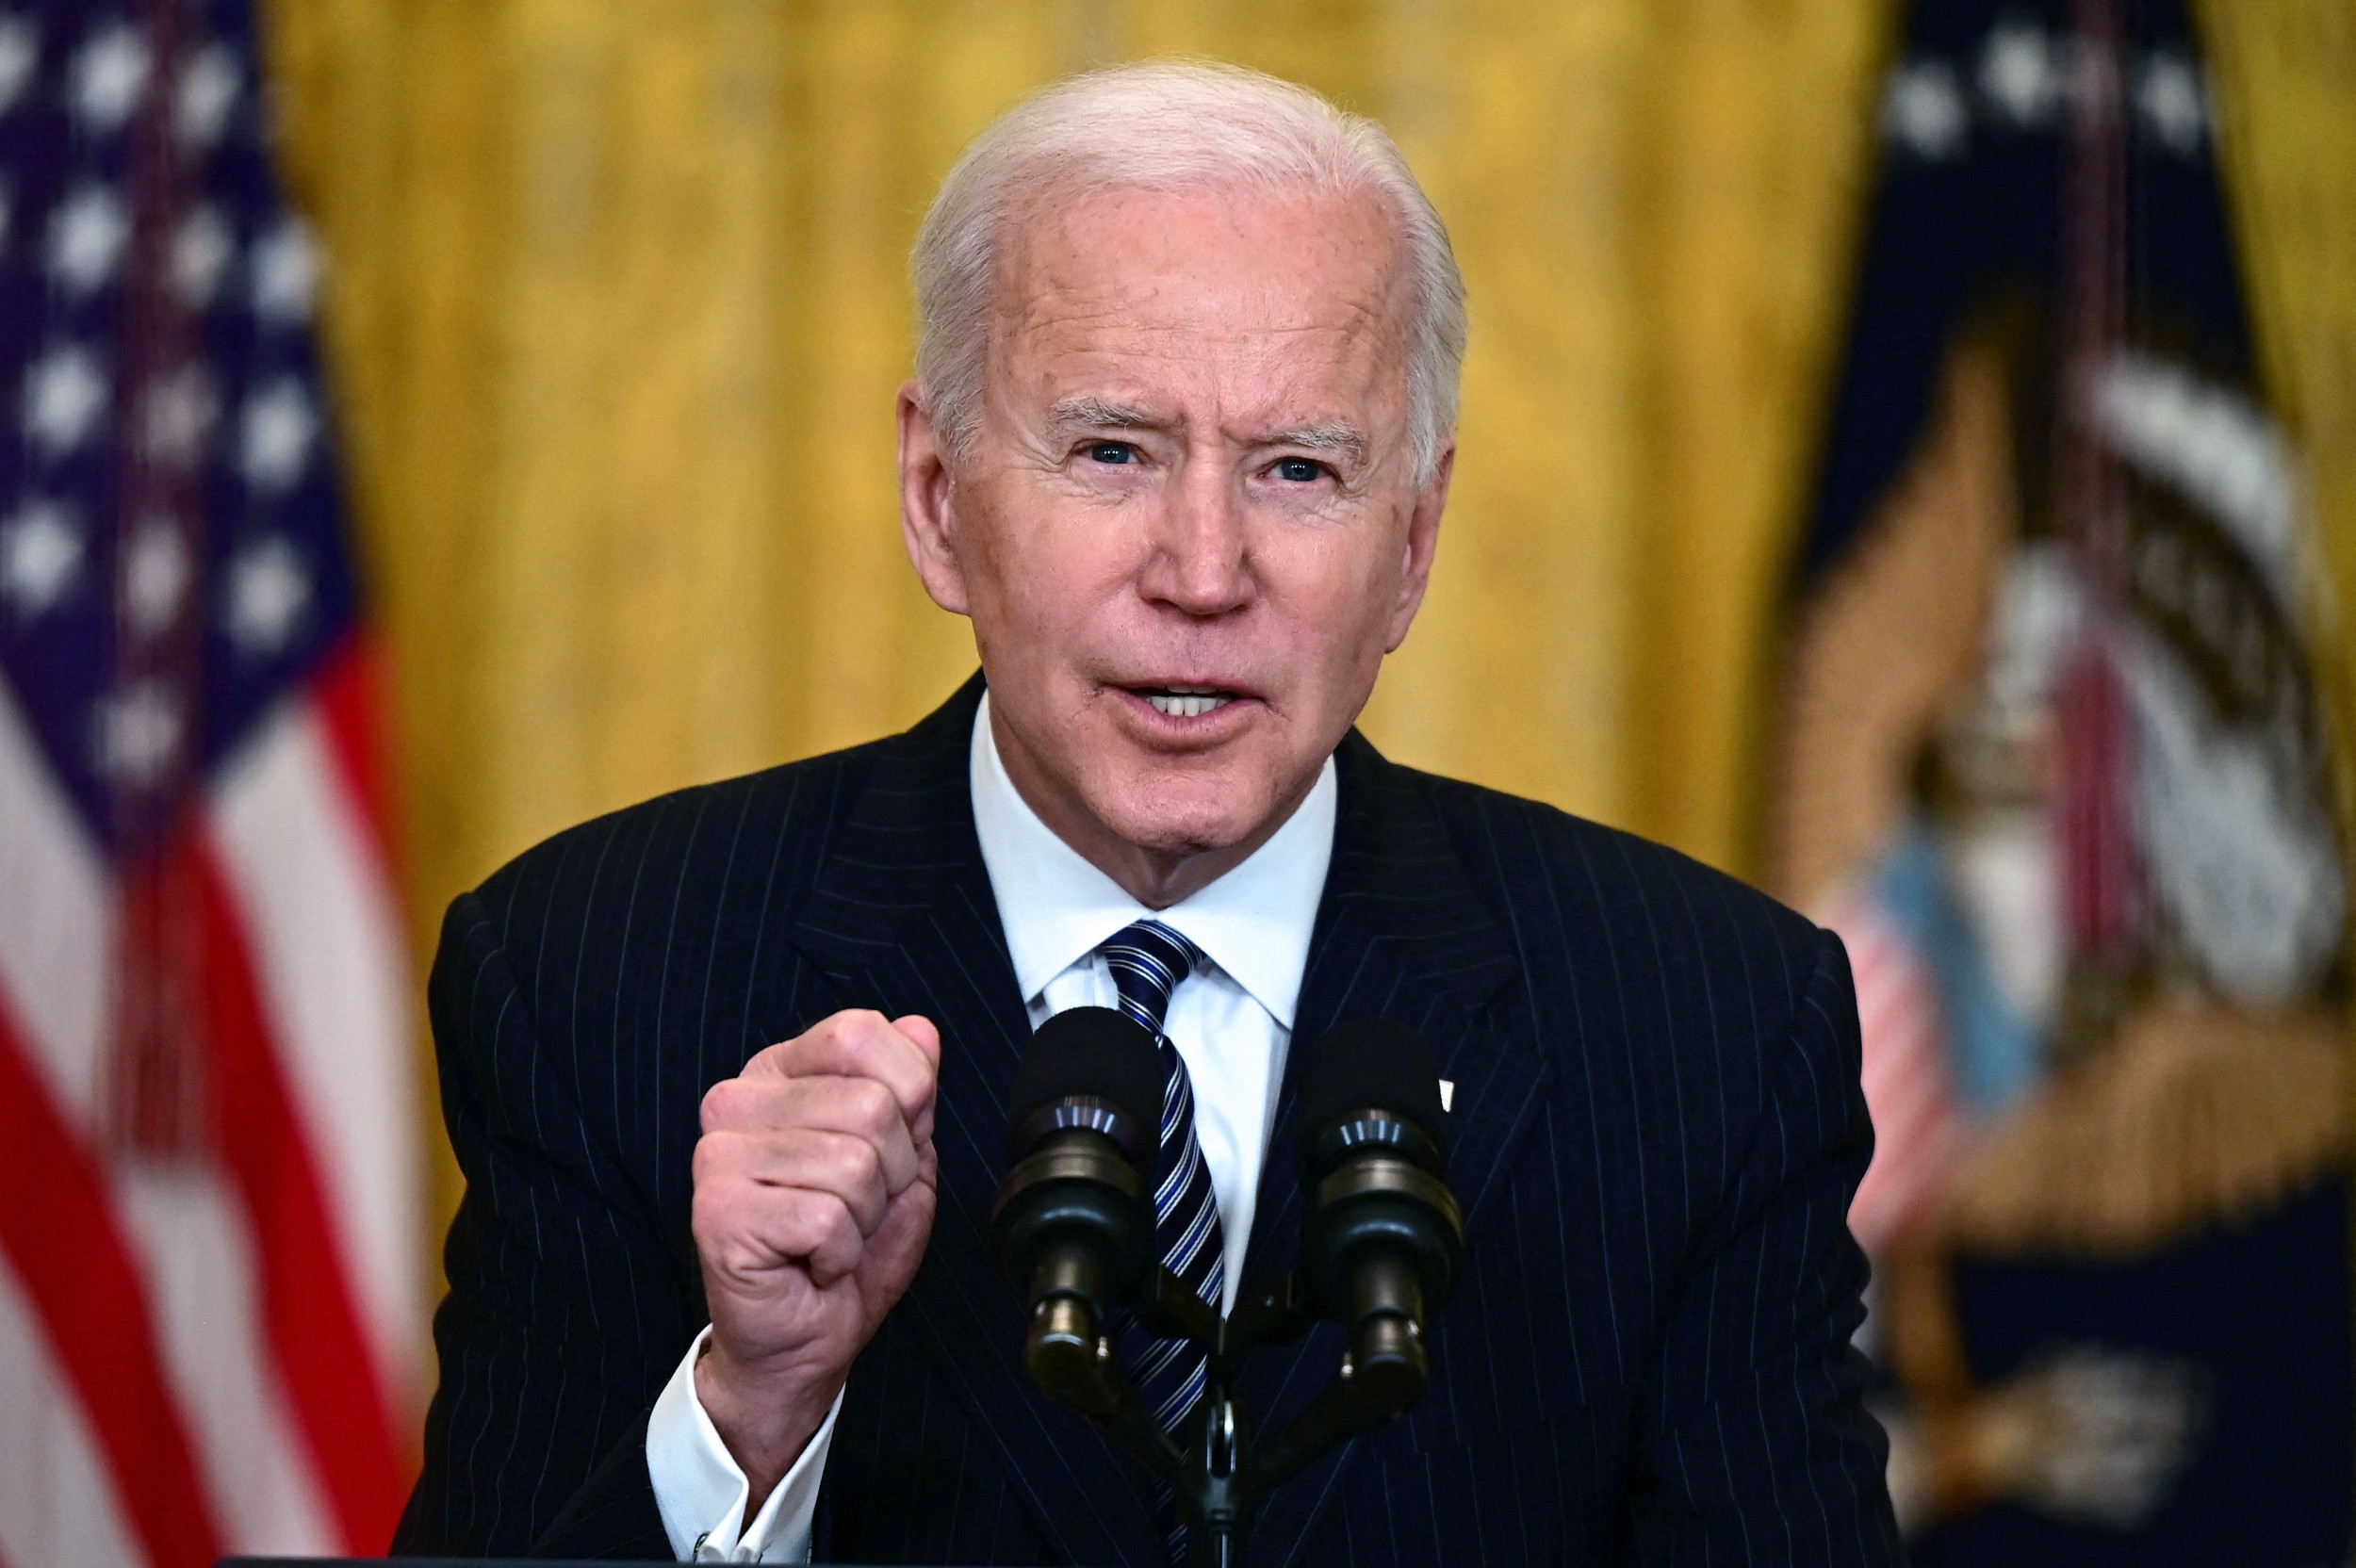 Joe Biden approval rating shows that nations are divided beyond simple party lines